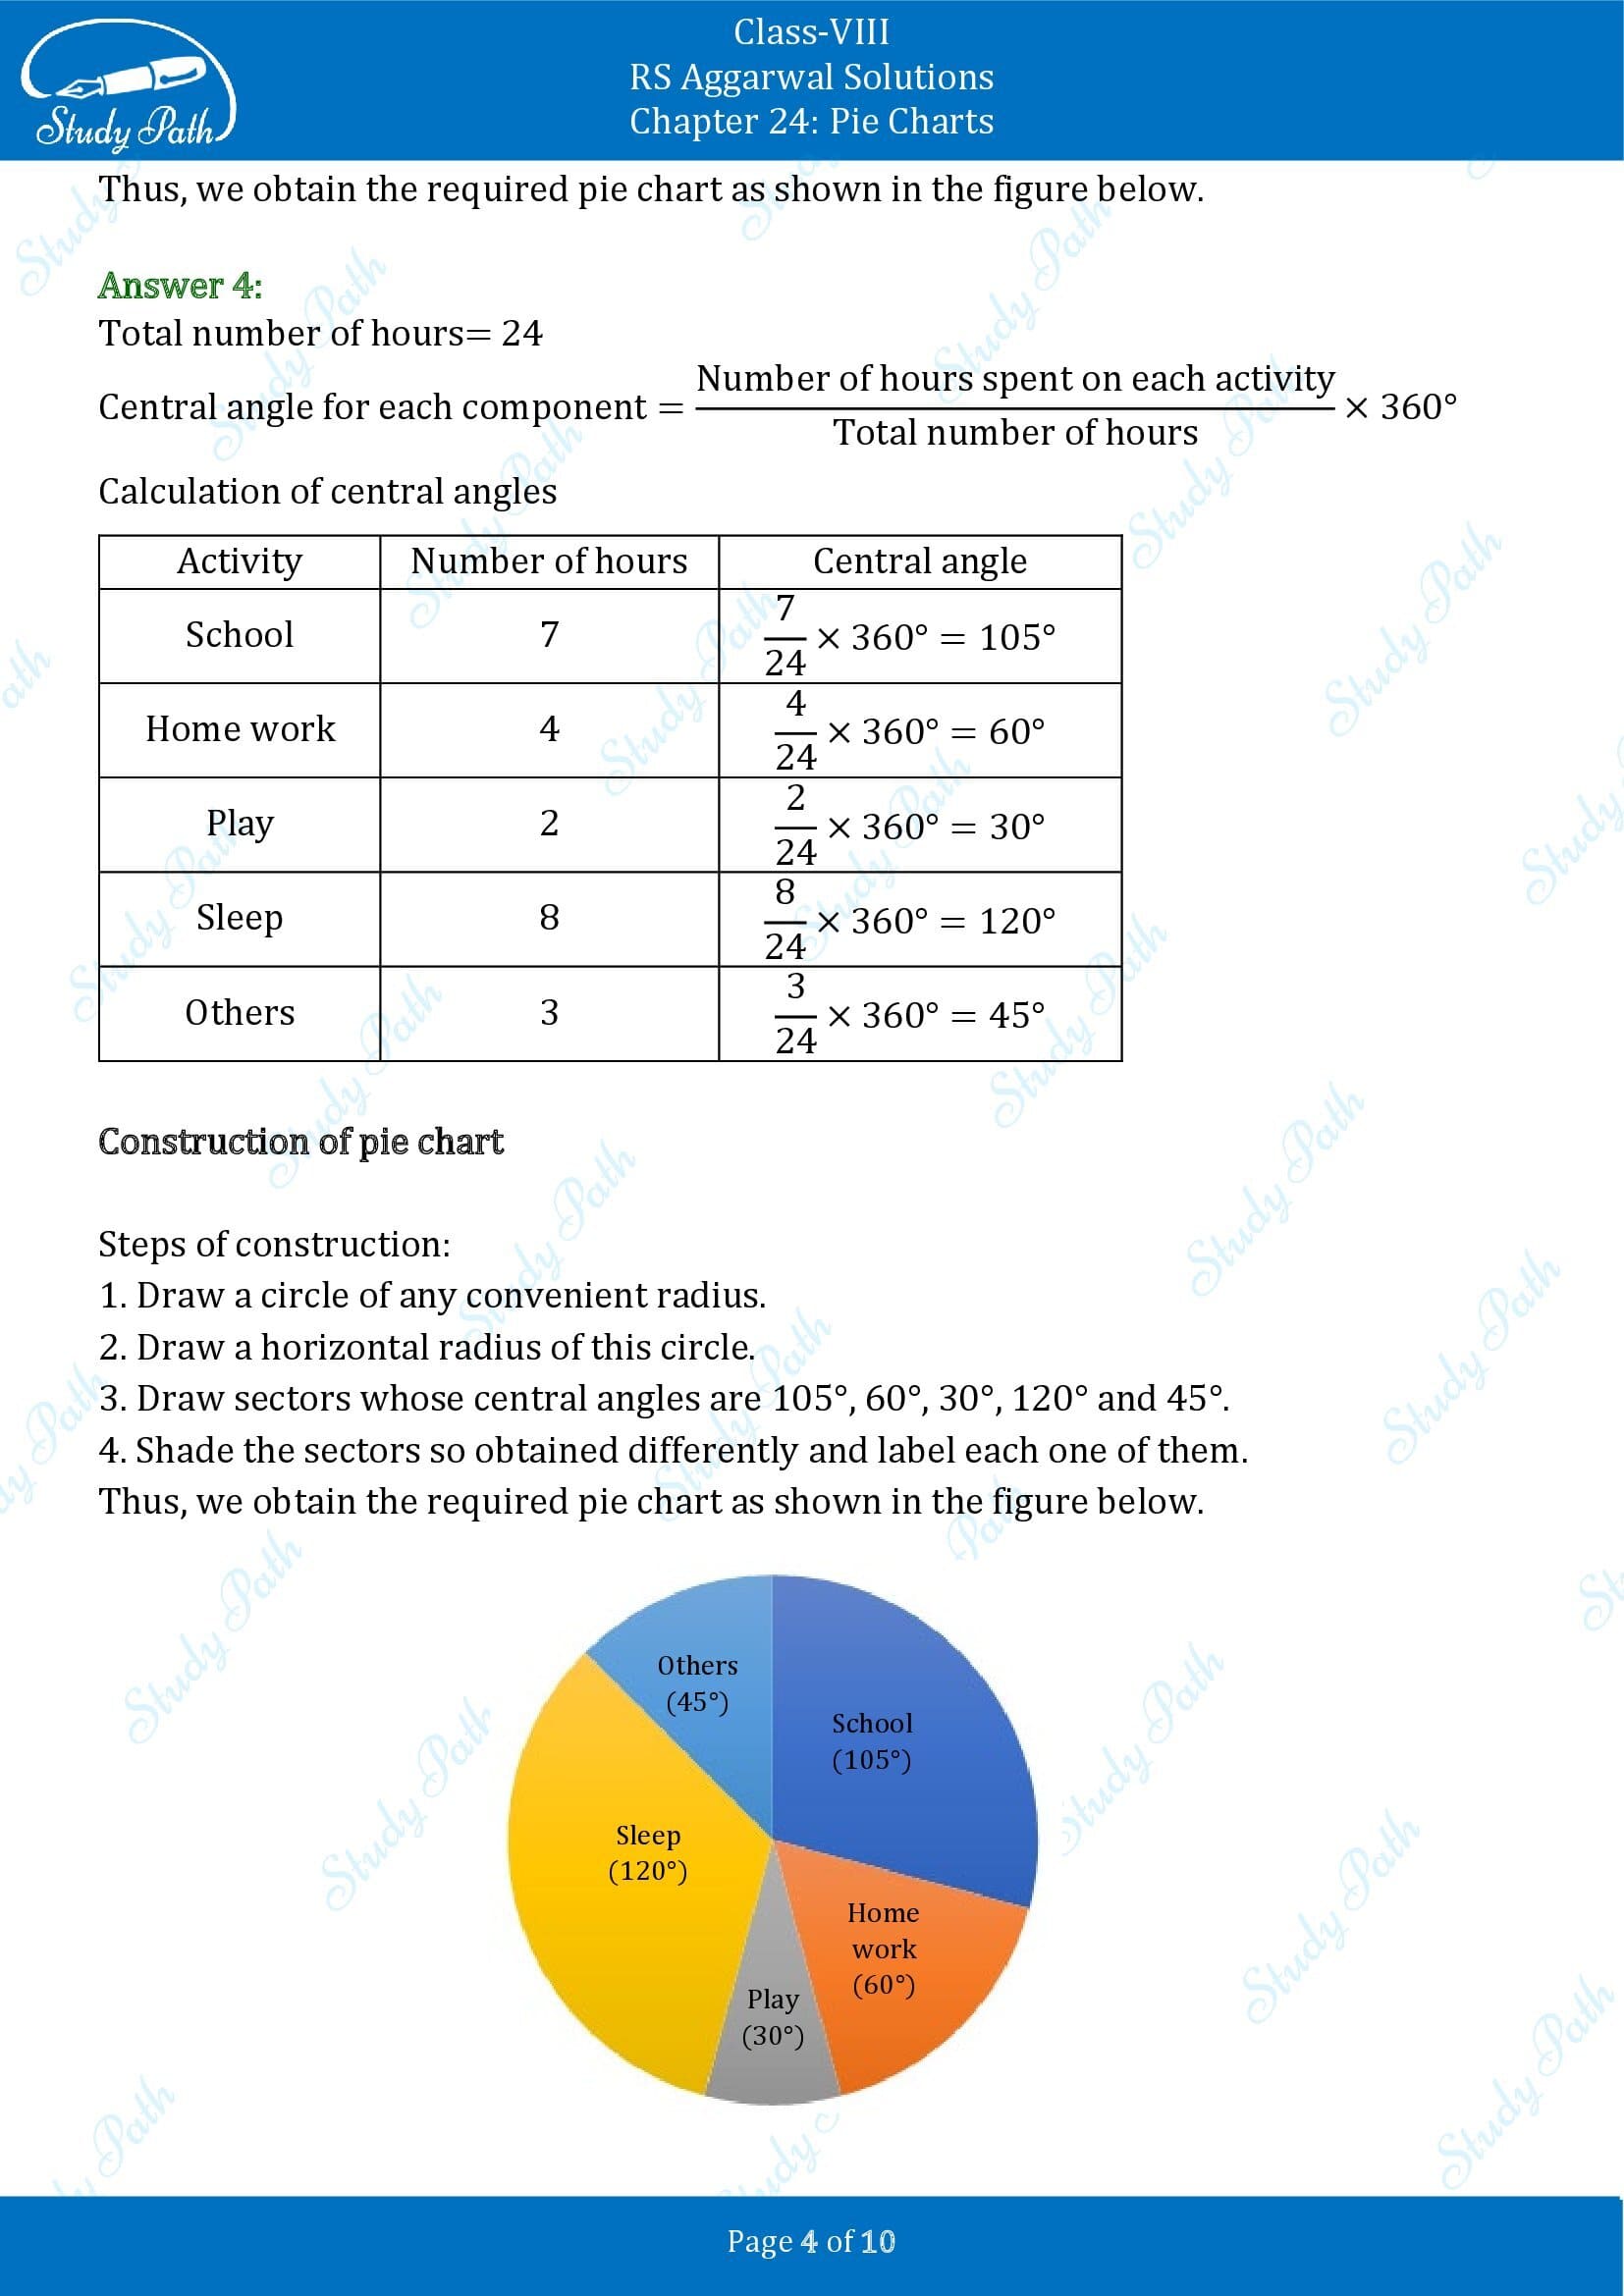 RS Aggarwal Solutions Class 8 Chapter 24 Pie Charts Exercise 24A 00004